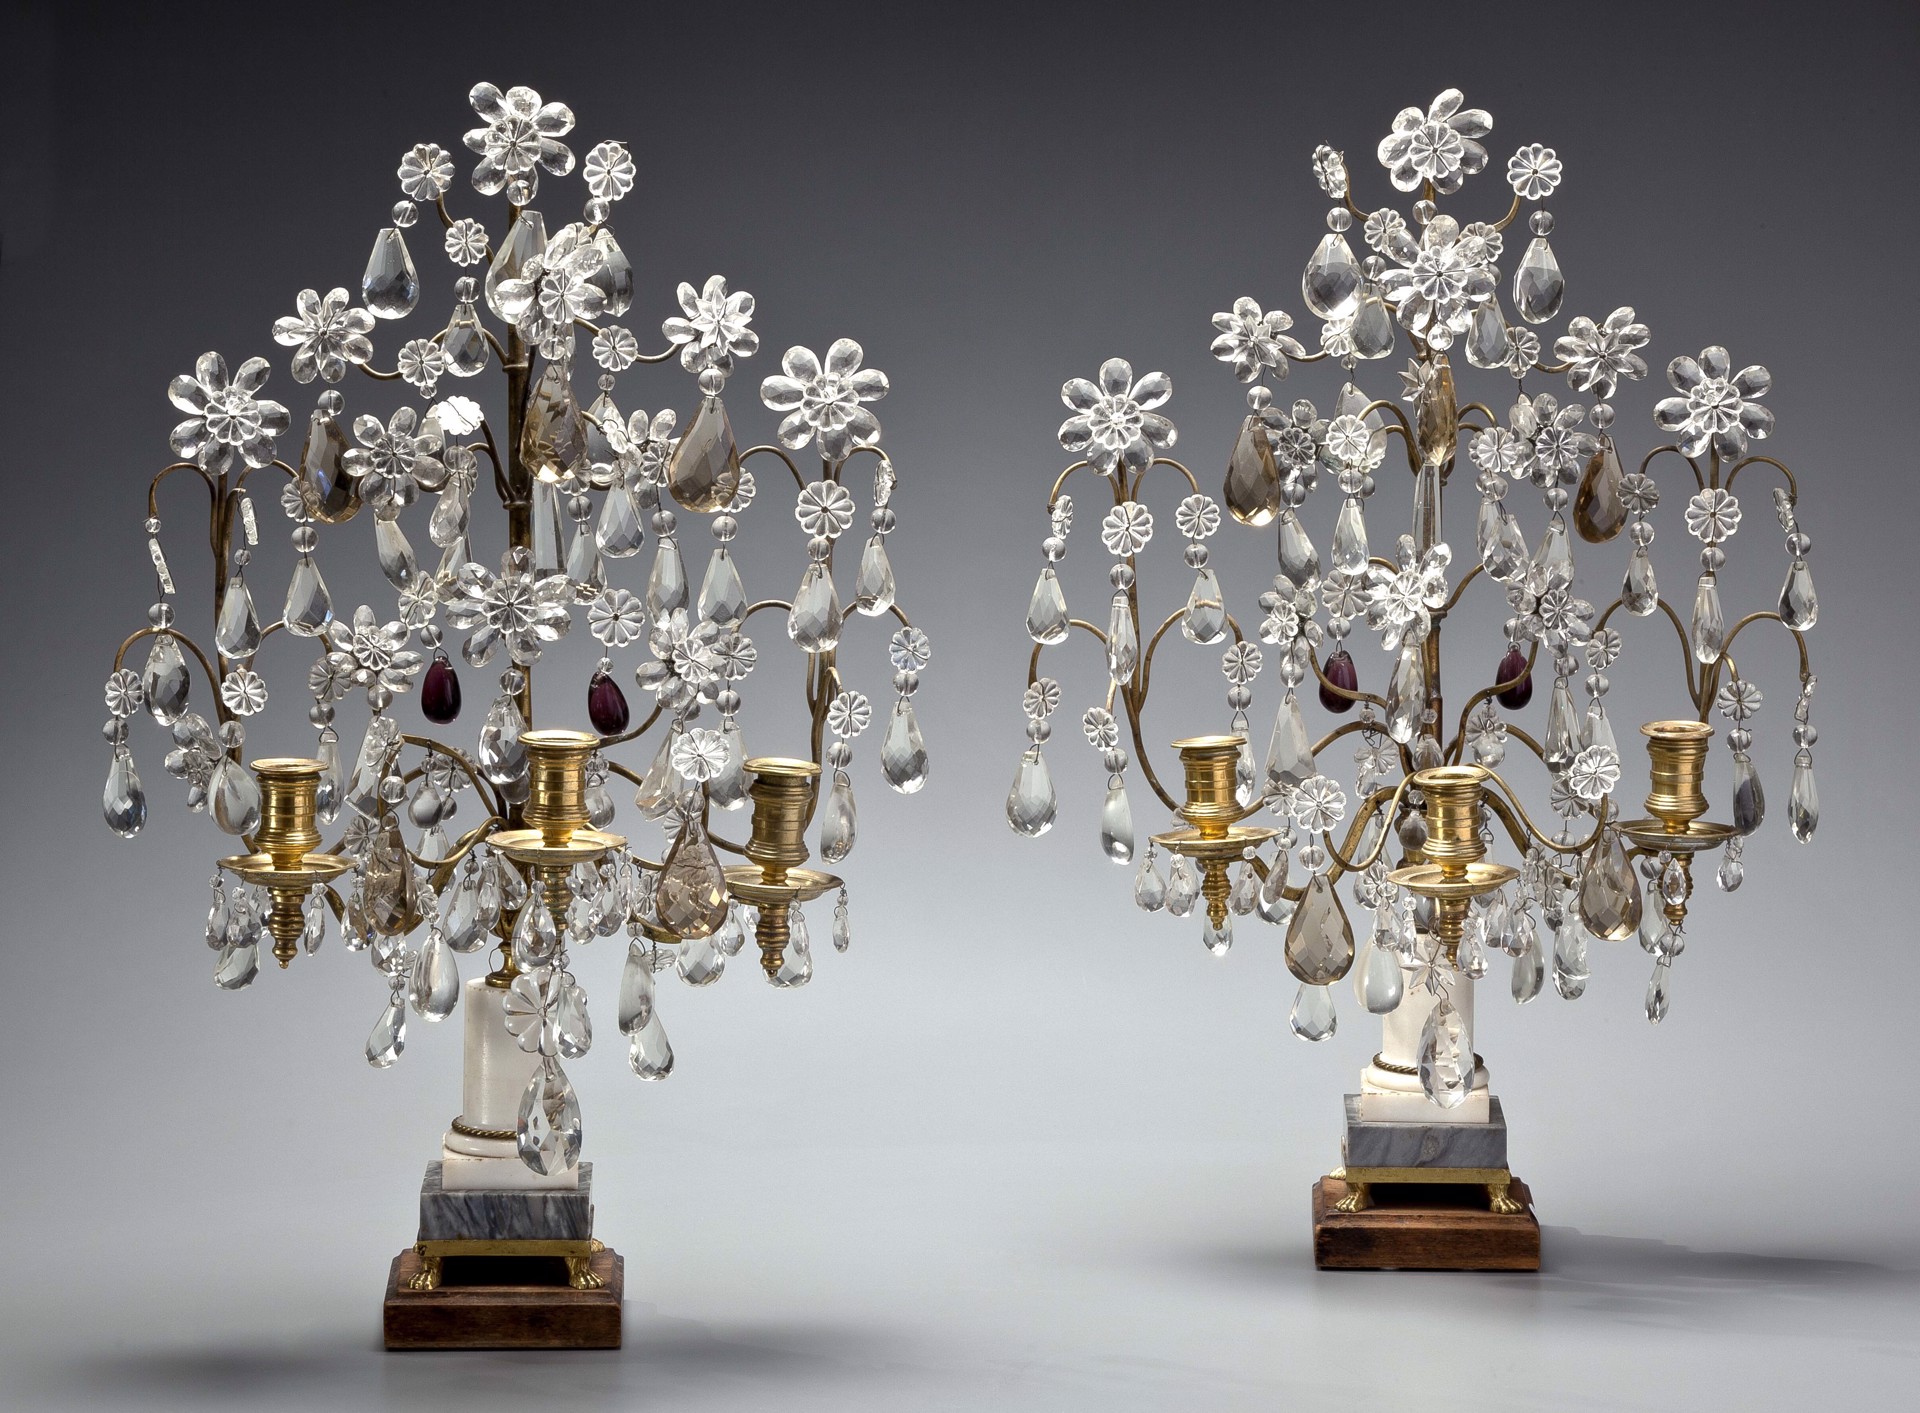 PAIR OF FRENCH GILT-METAL AND GLASS GIRANDOLES